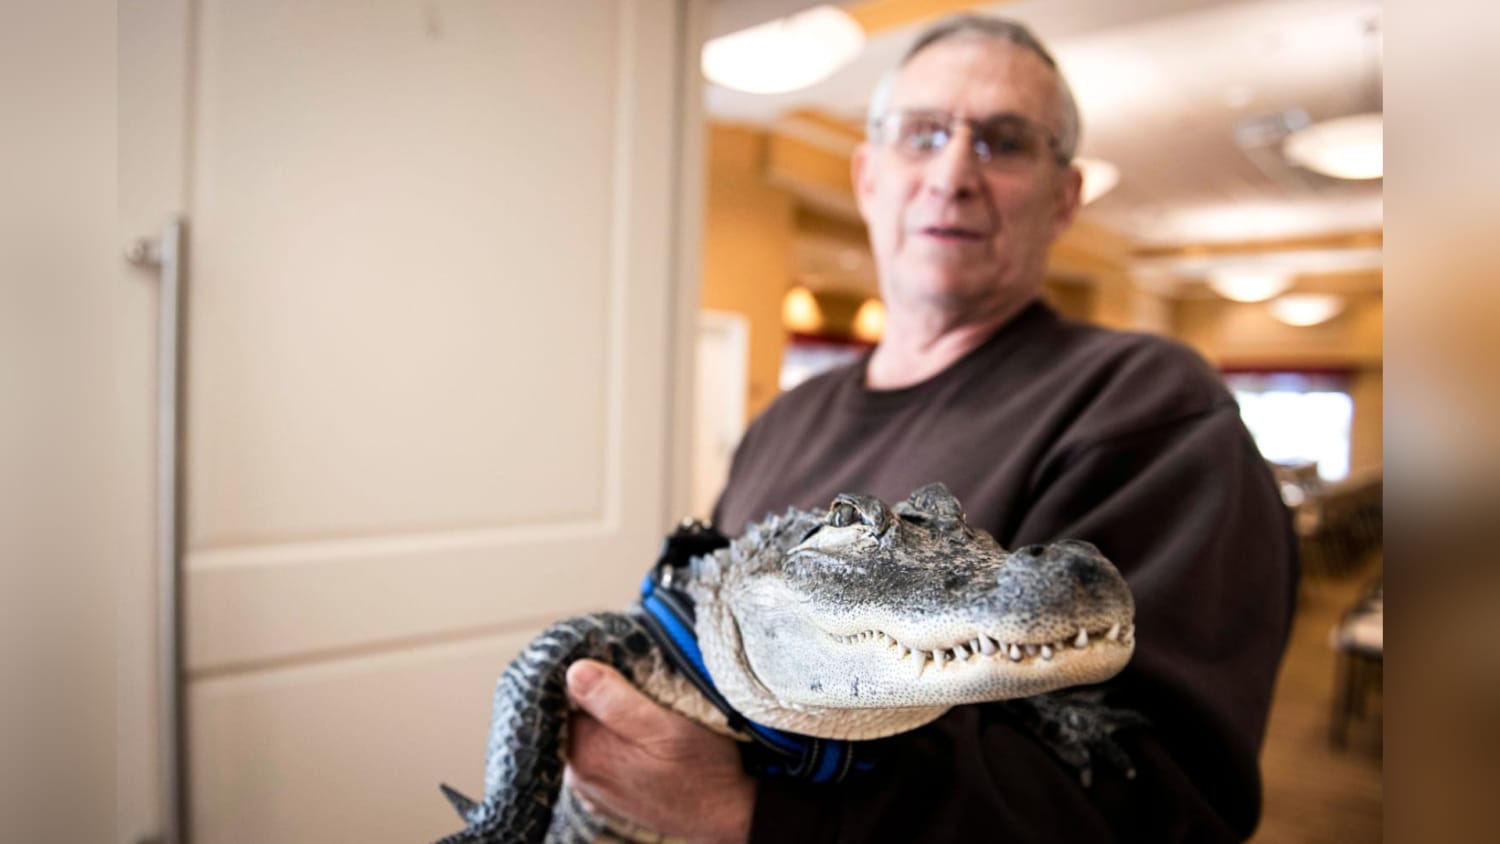 Alligators have been his “medicine” against depression for years.  Now he is asking for help to get it back.